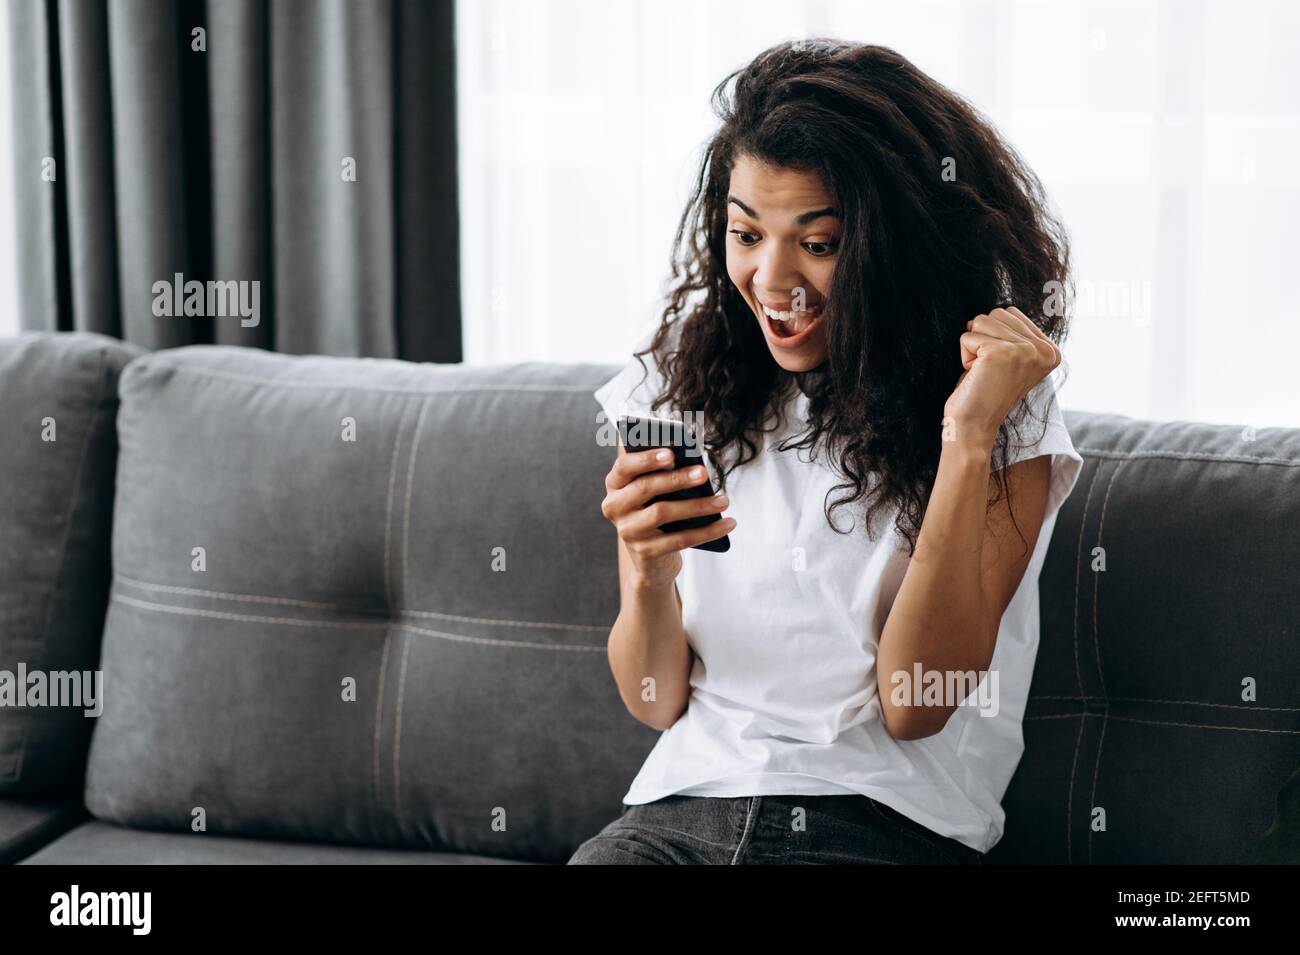 Joyful young lady sitting on the couch, using smartphone. Excited beautiful woman look at the screen, winning at the phone game or reading good news, pass exams or get a dream job Stock Photo